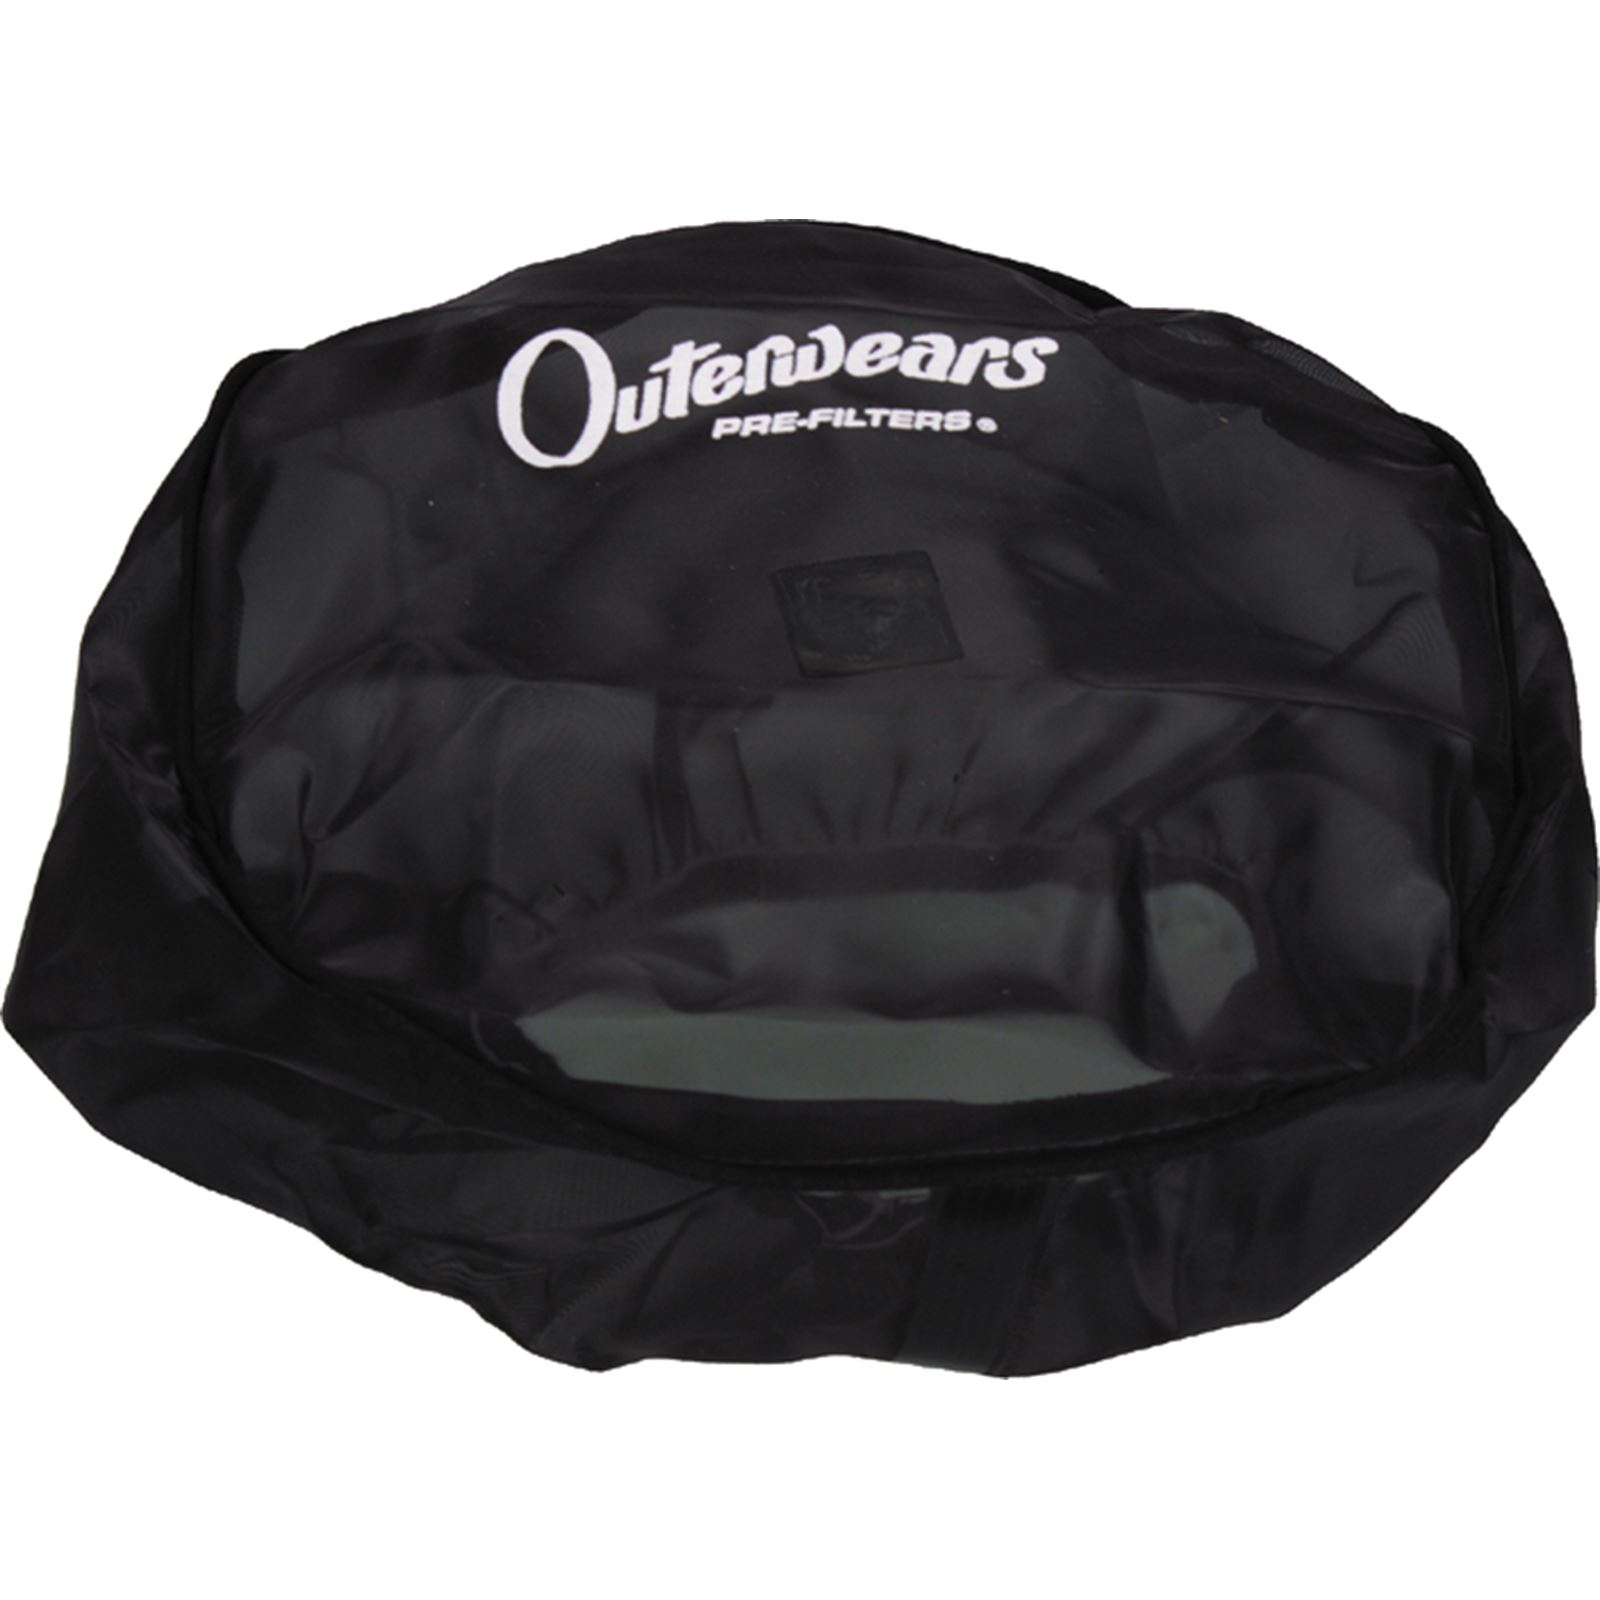 Black Outerwears 20-1049-01 Water Repellent Pre-Filter 